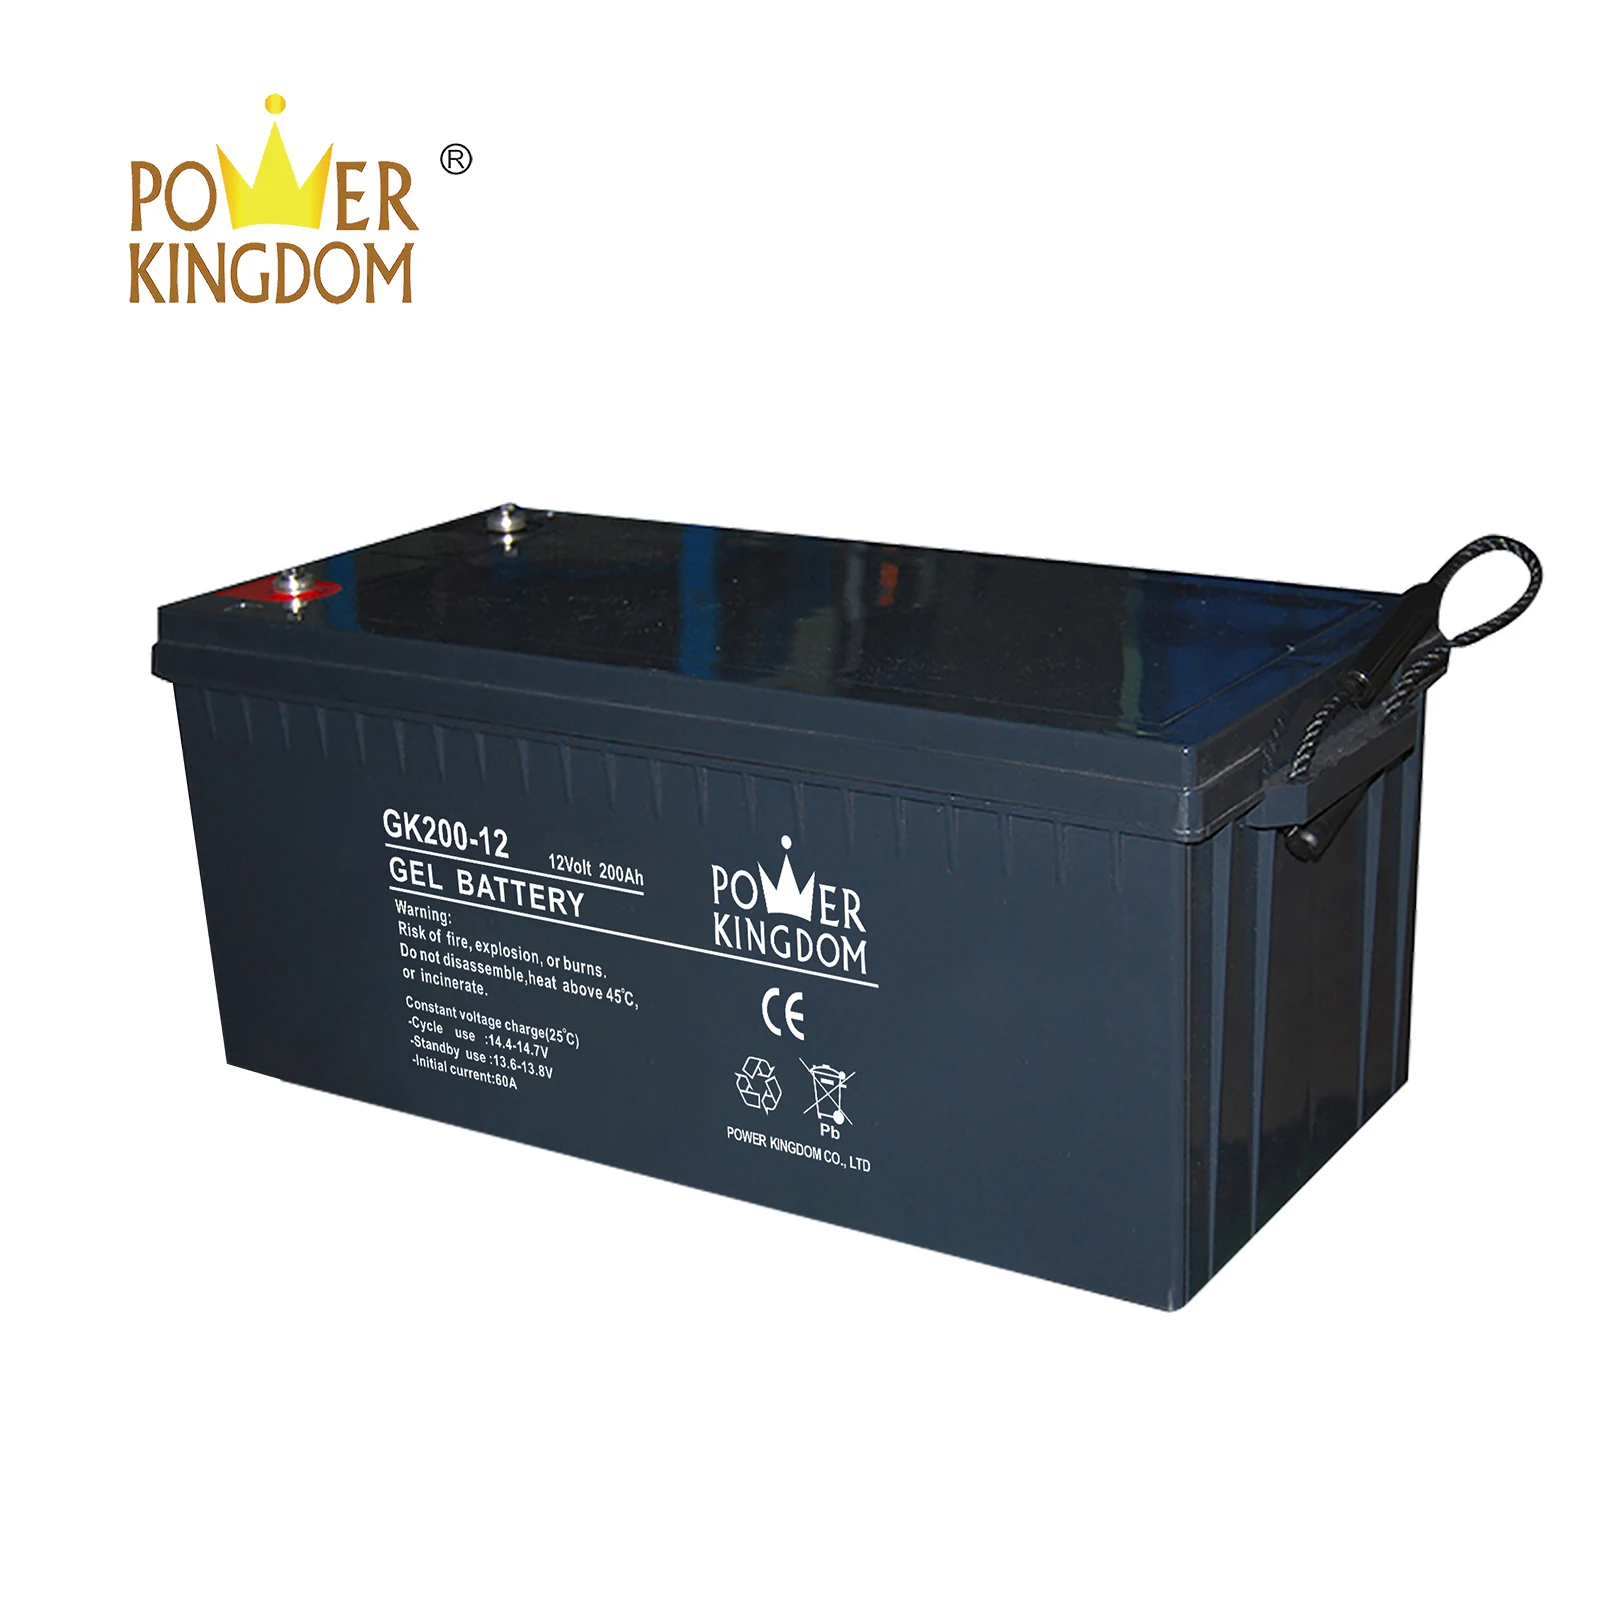 Power Kingdom high consistency rechargeable sealed lead acid battery design wind power system